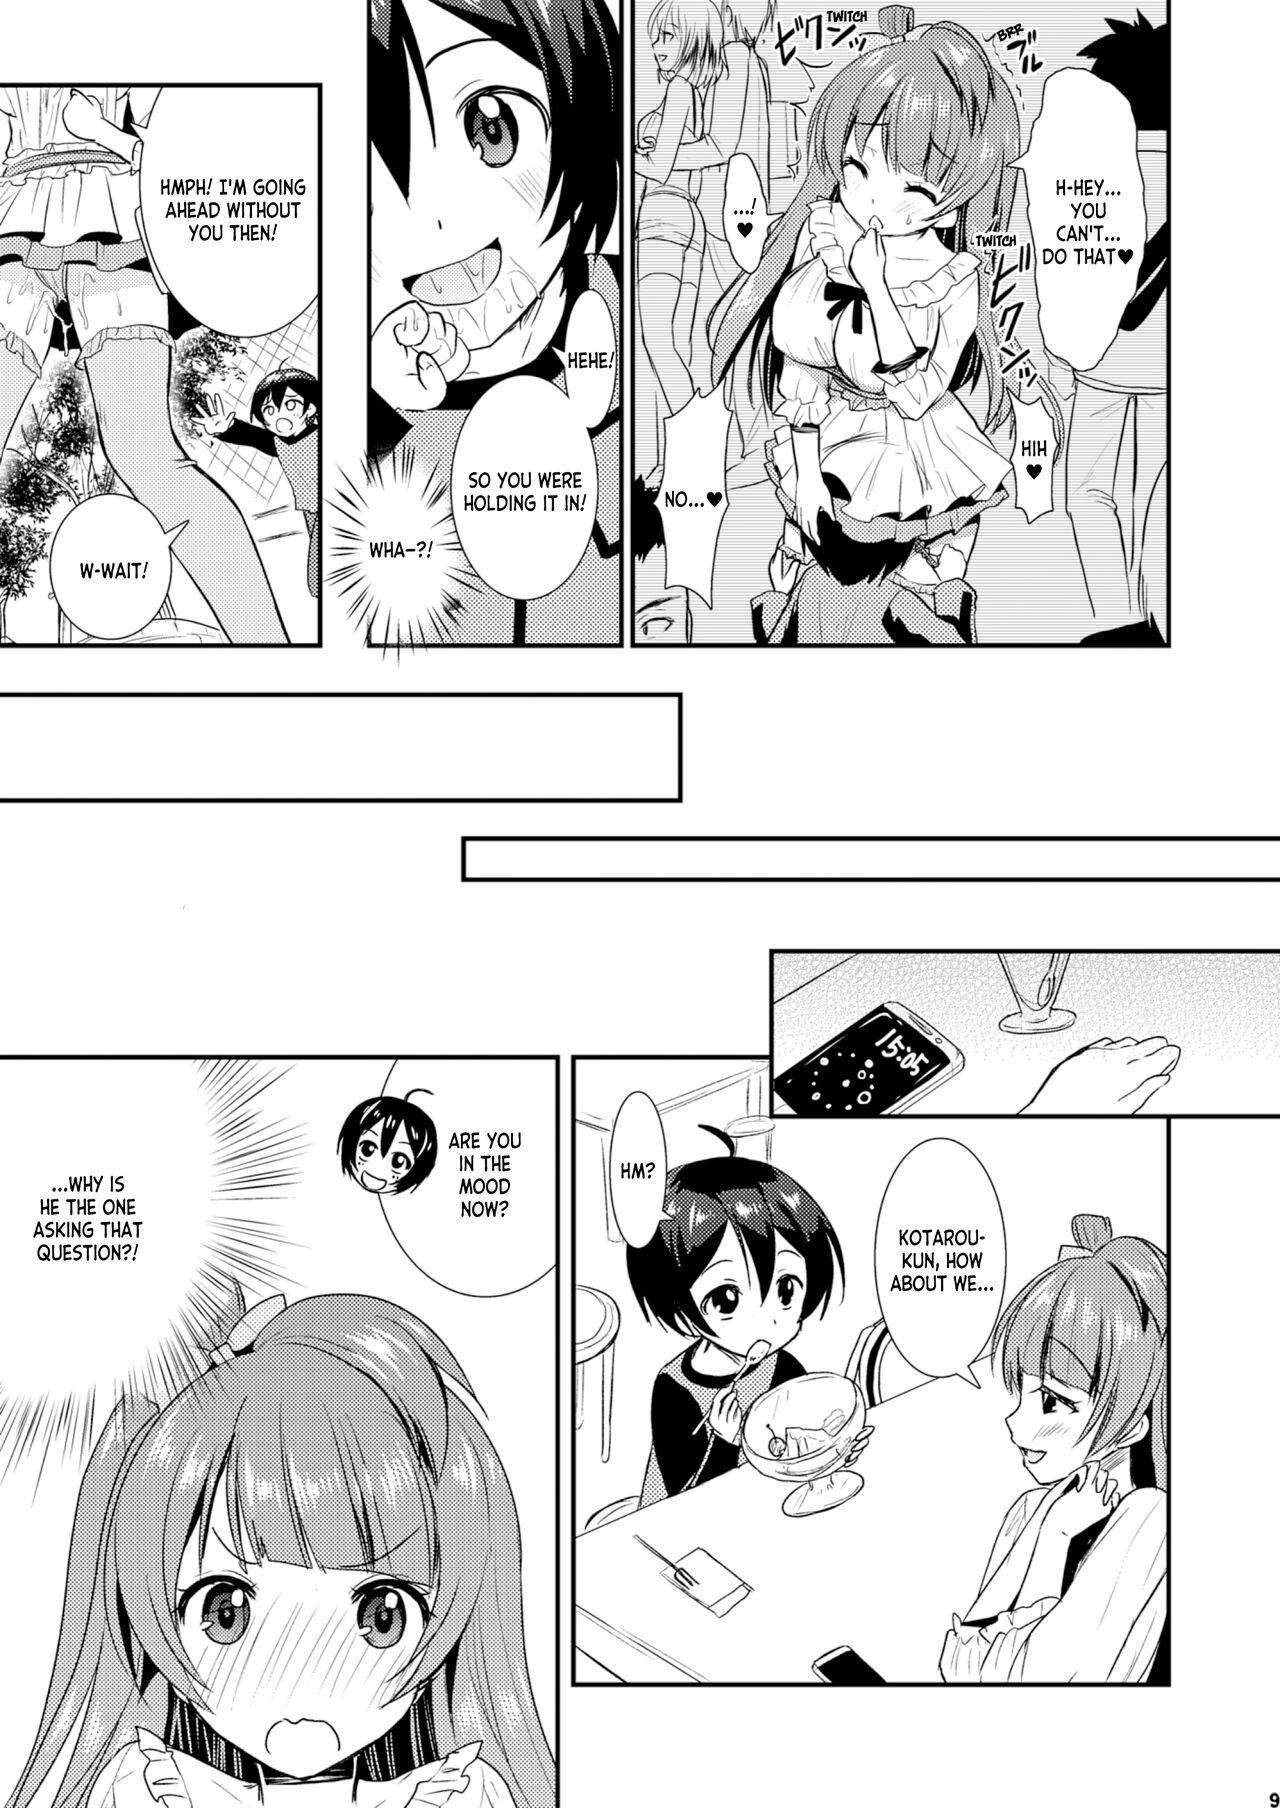 Scissoring Eat Meat Girl 2 - Love live Amadora - Page 9